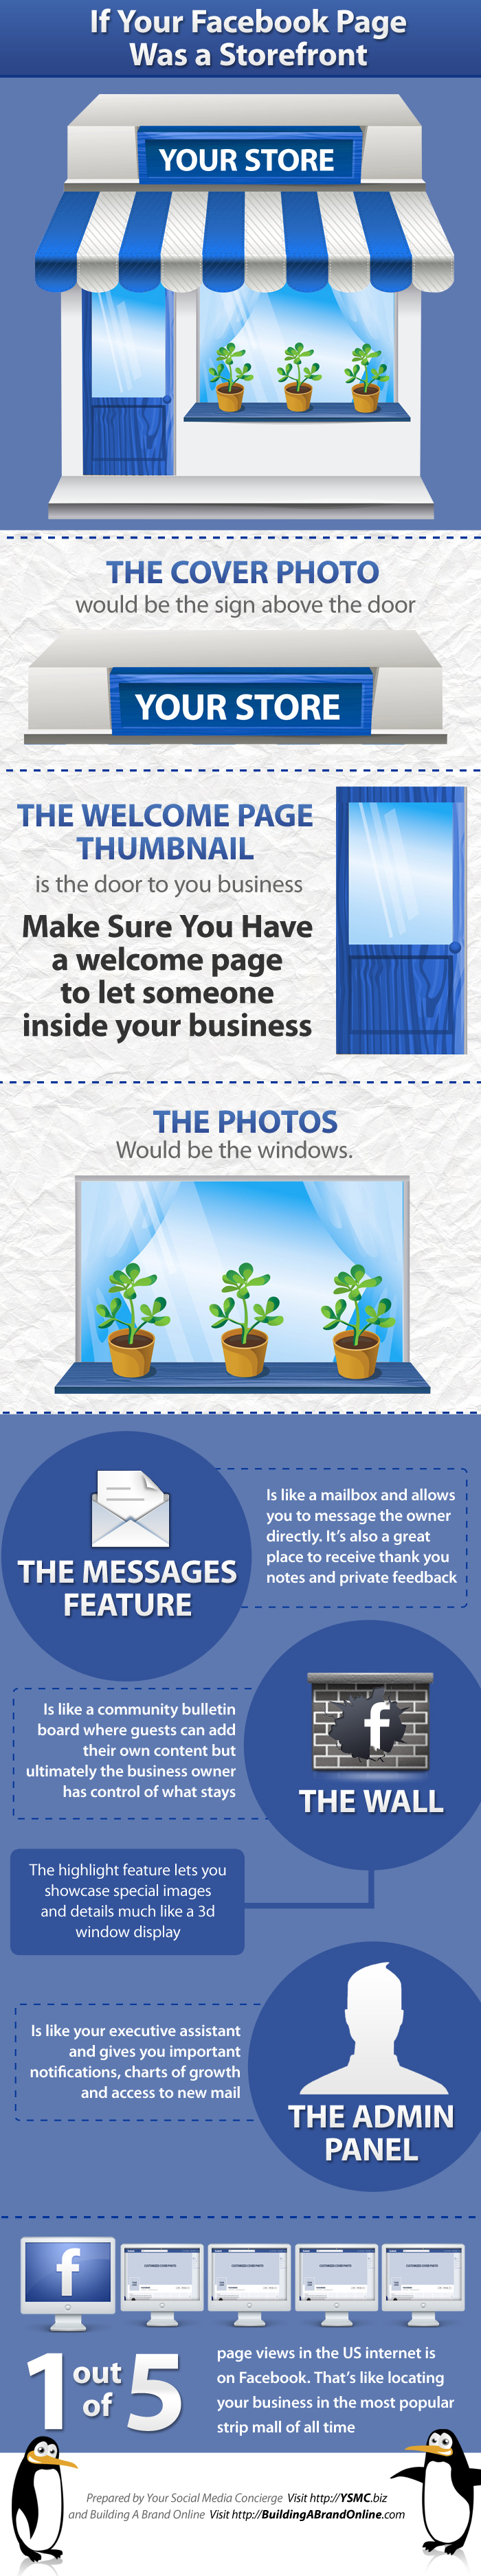 facebookInfograph 2 INFOGRAPHIC: Your Facebook Timeline is like a Storefront 